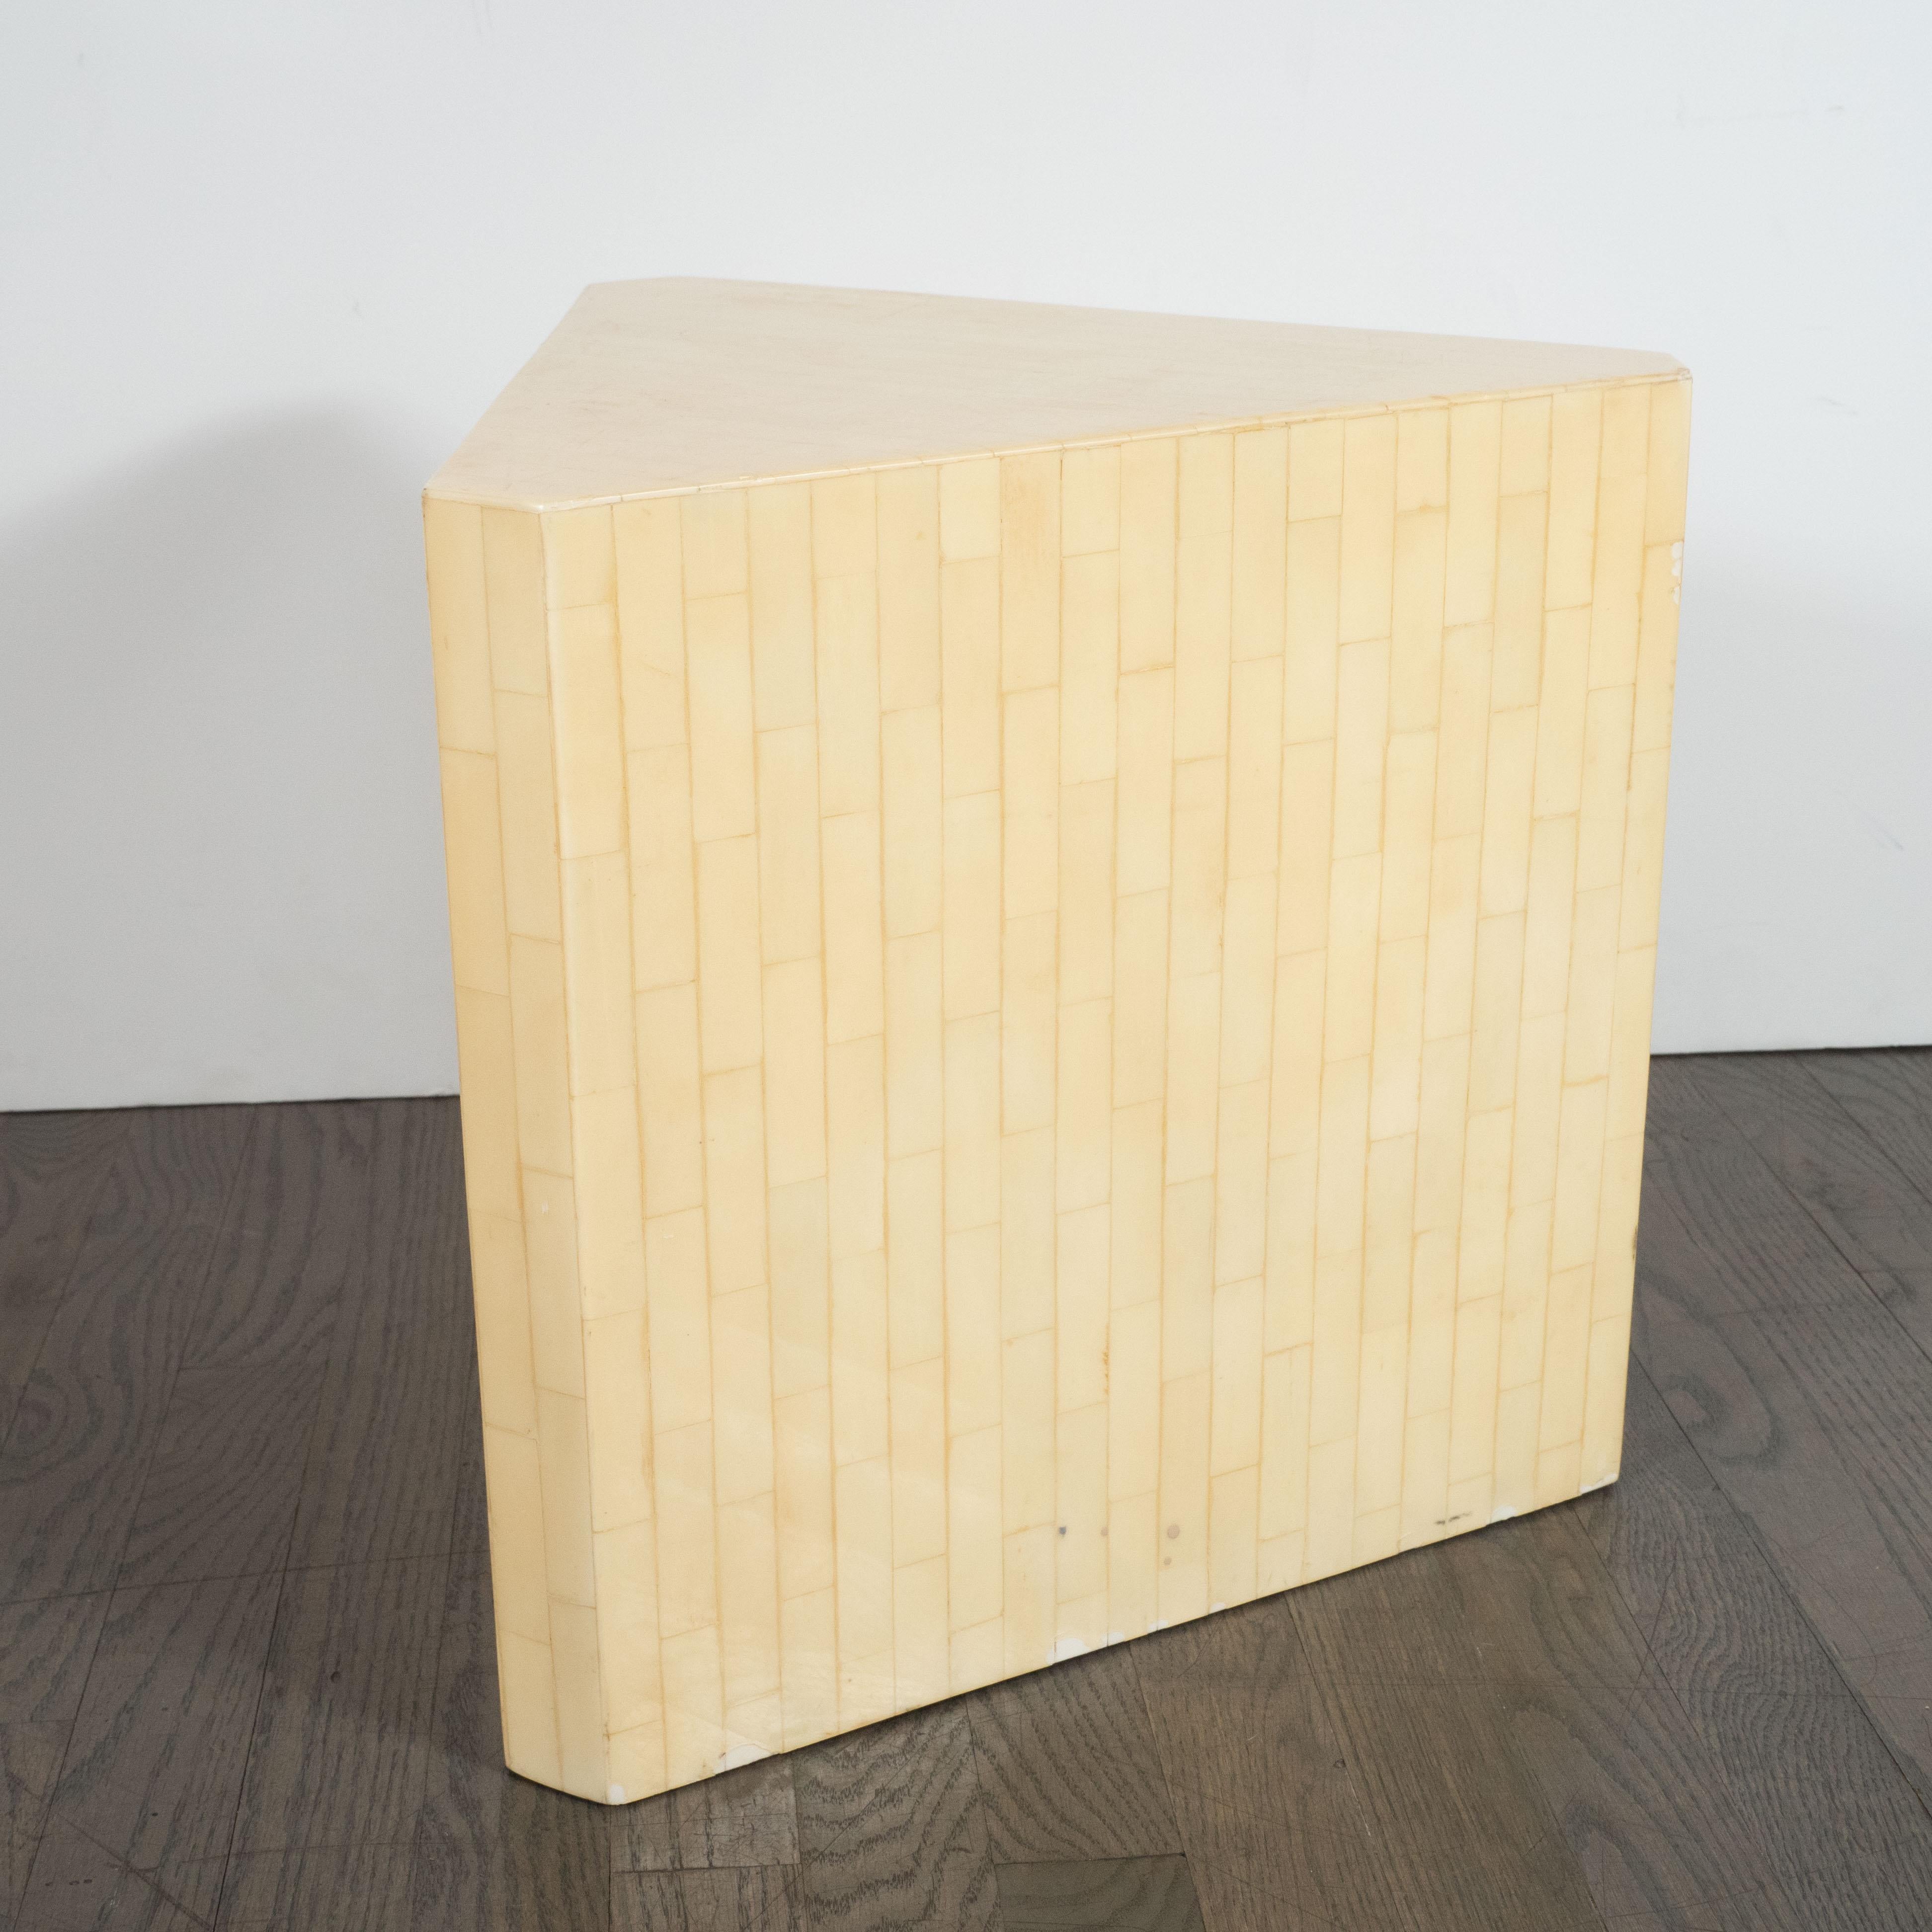 This gorgeous pair of Mid-Century Modern tessellated stone end/side Tables were realized by the esteemed American design firm Maitland Smith, circa 1980. They offer volumetric triangular forms with squared corners composed of an abundance of